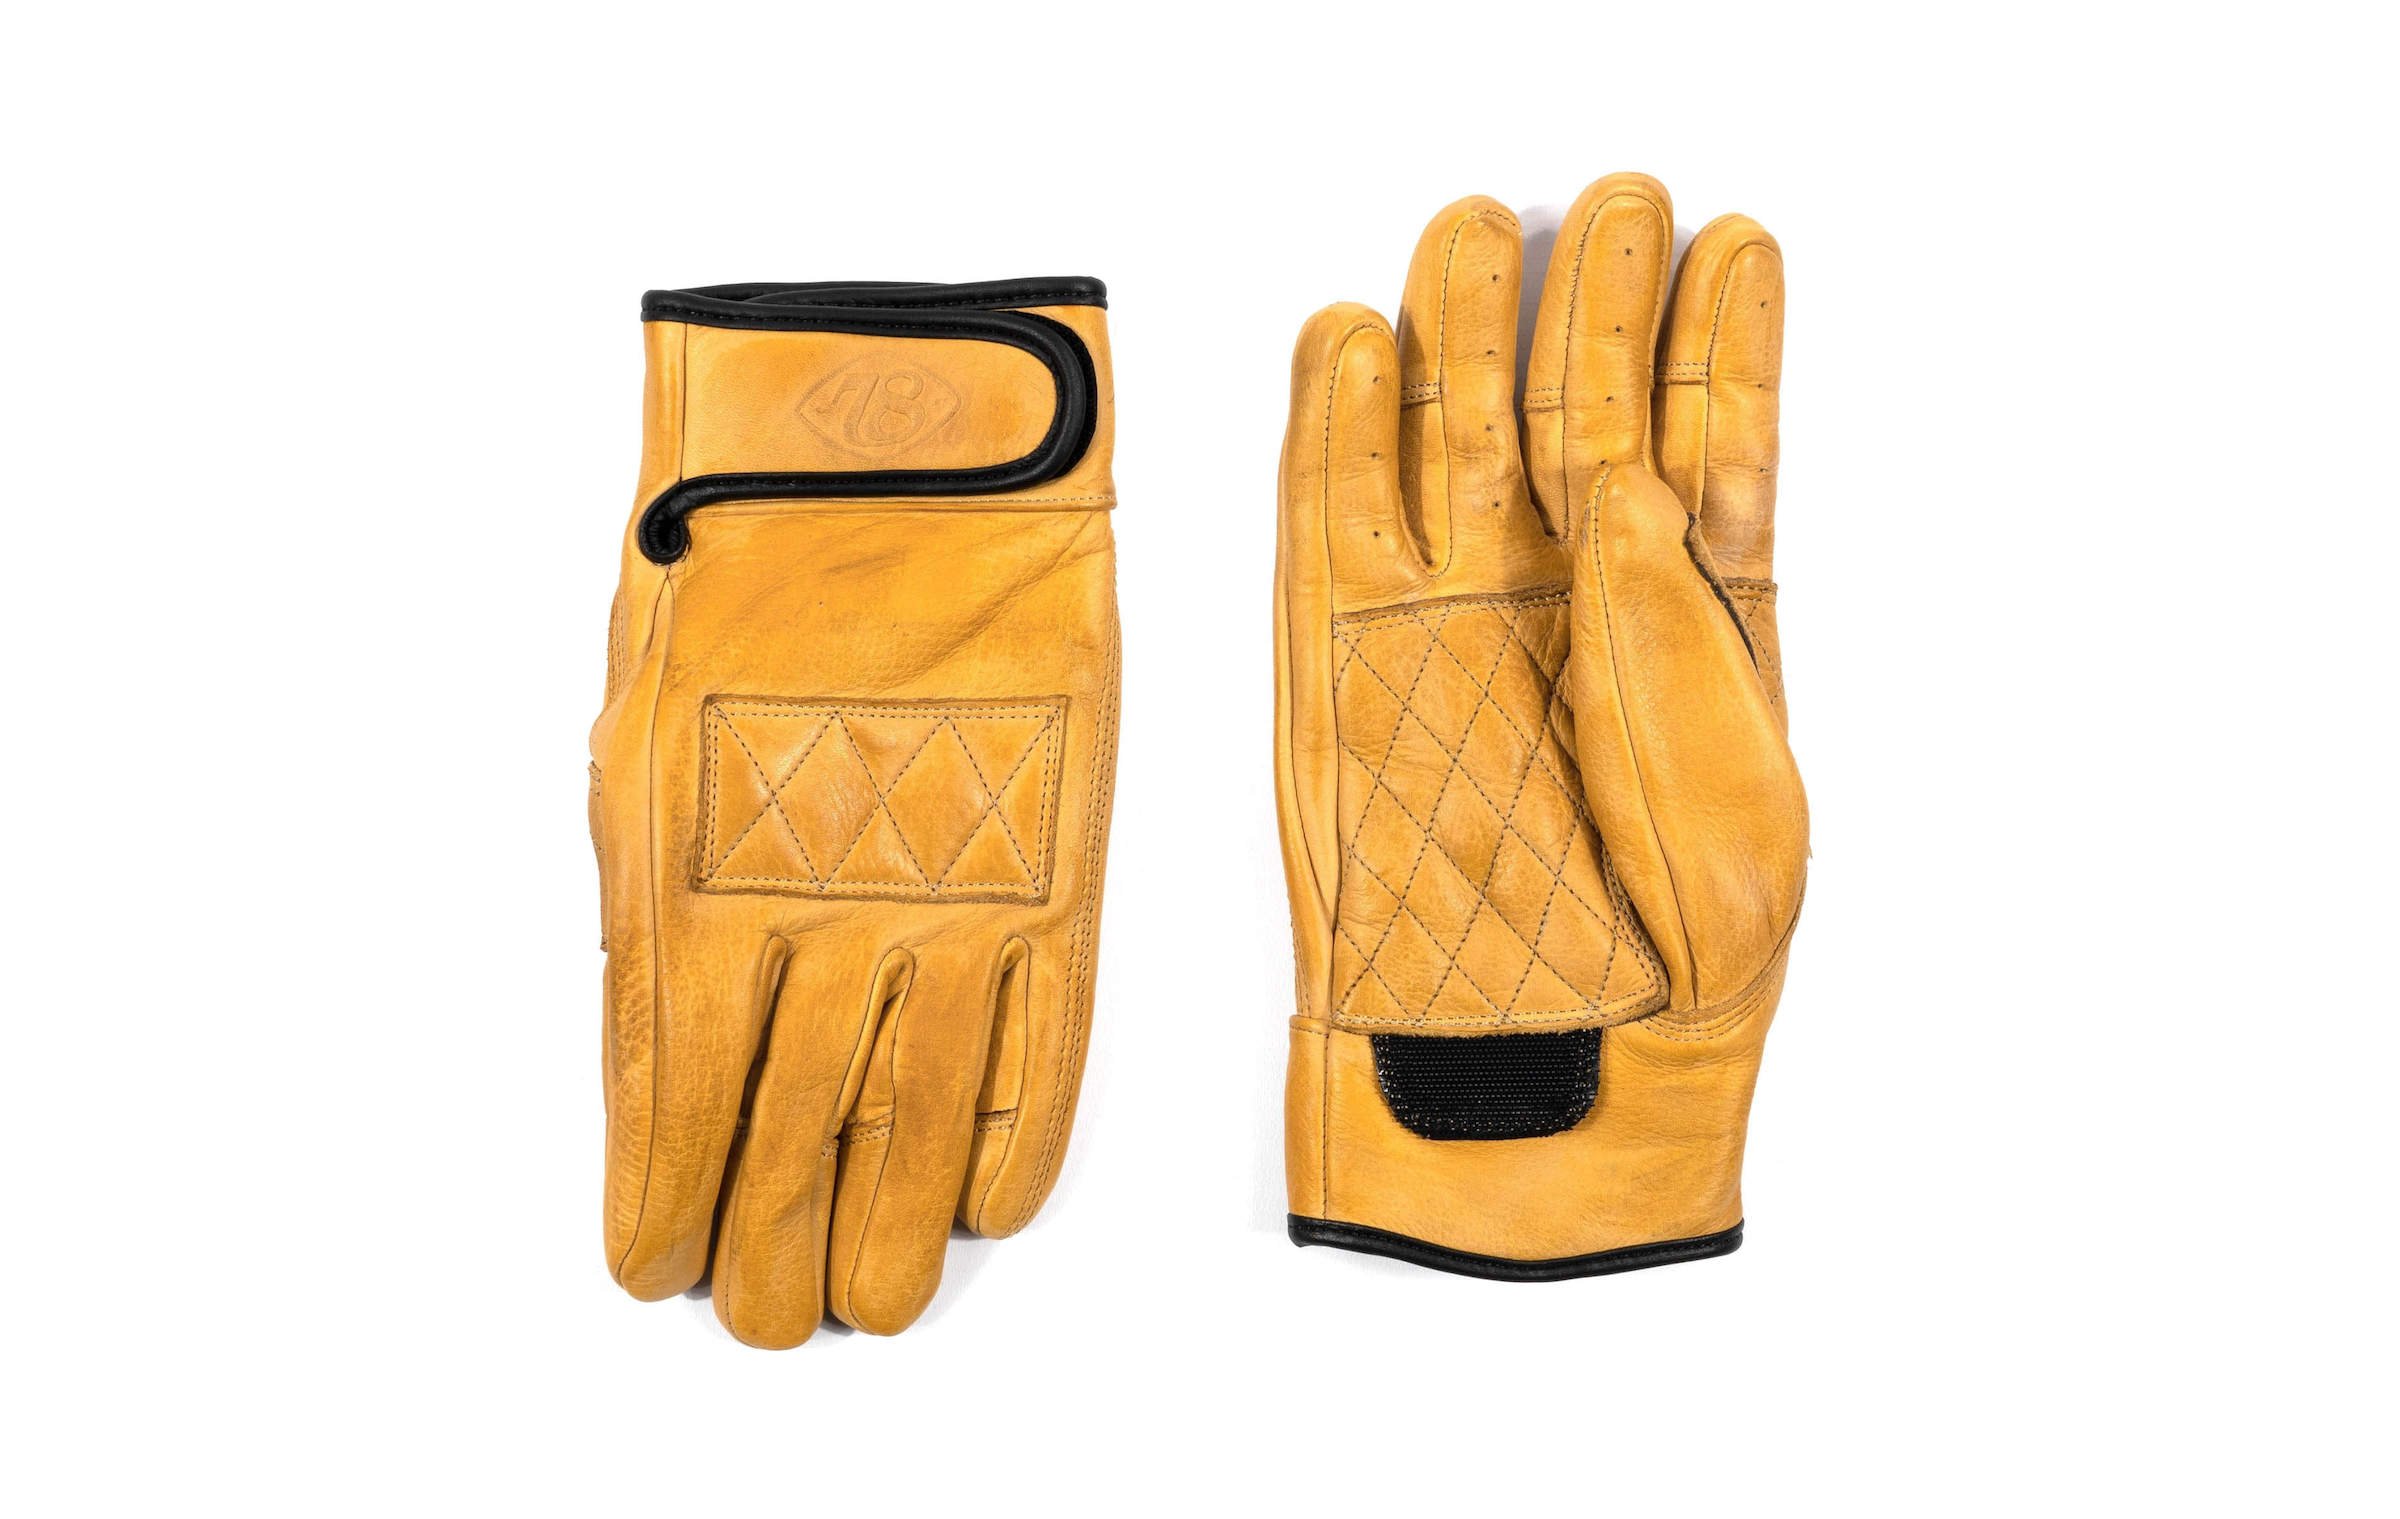 78 Motor Co Sirocco Motorcycle Gloves